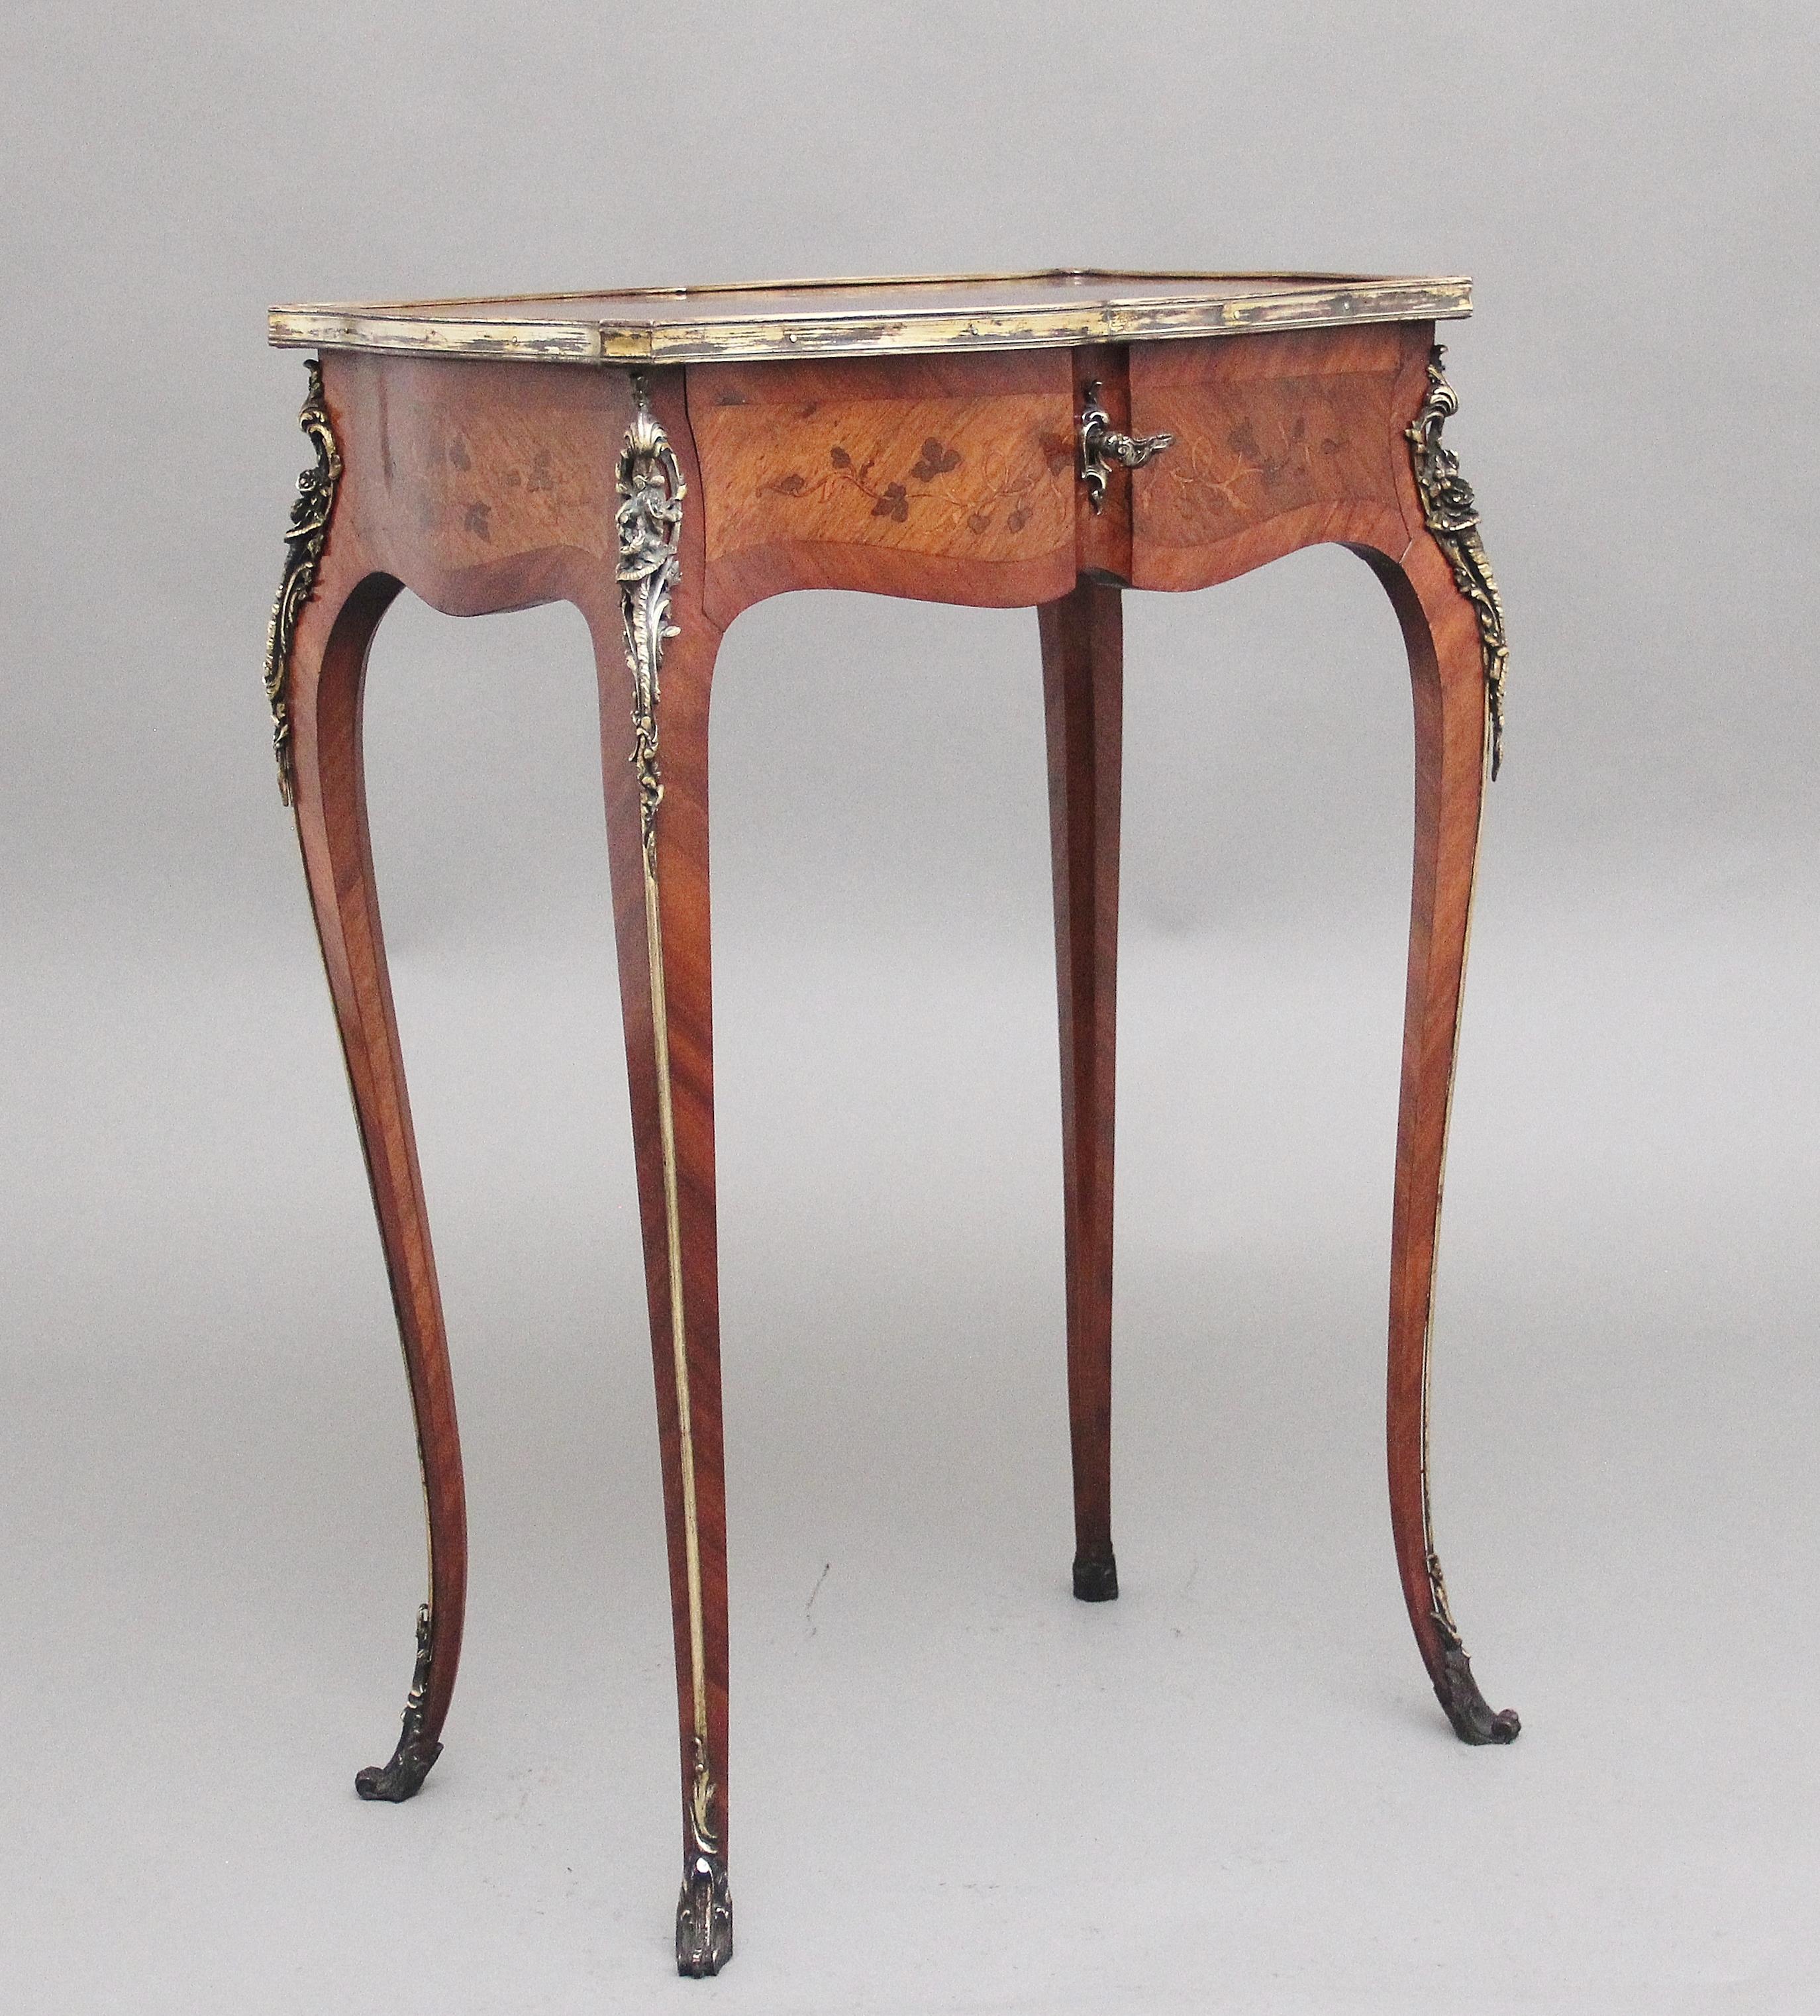 A freestanding 19th Century French Kingwood and marquetry side table, the shaped top decorated with floral marquetry and having a crossbanded edge, the edge of the top having brass moulding, the same decorative marquetry is also all sides of the